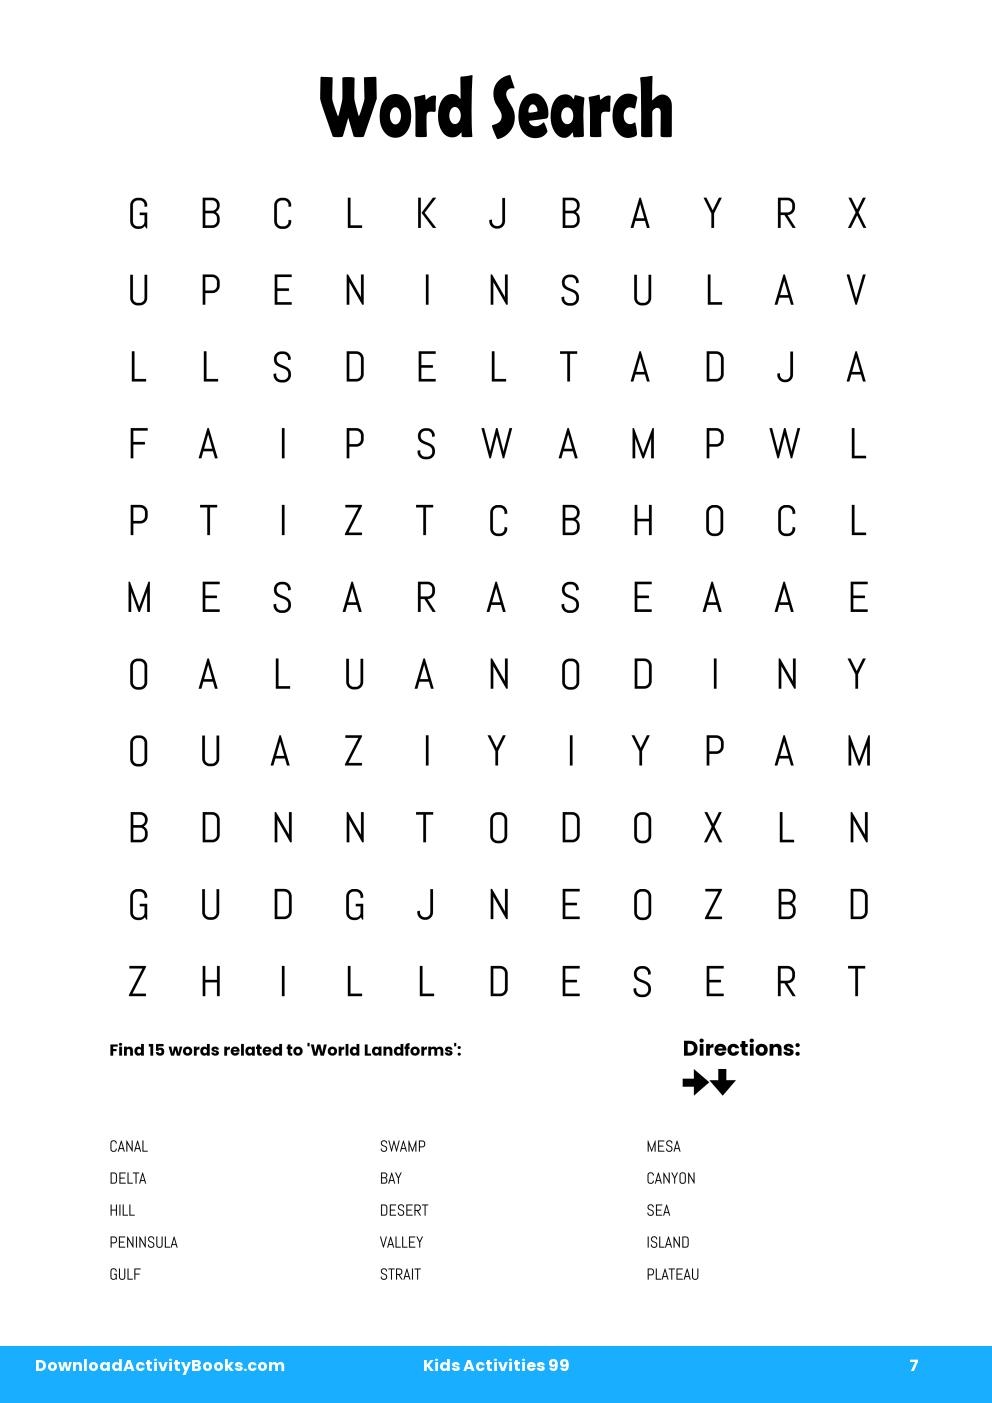 Word Search in Kids Activities 99